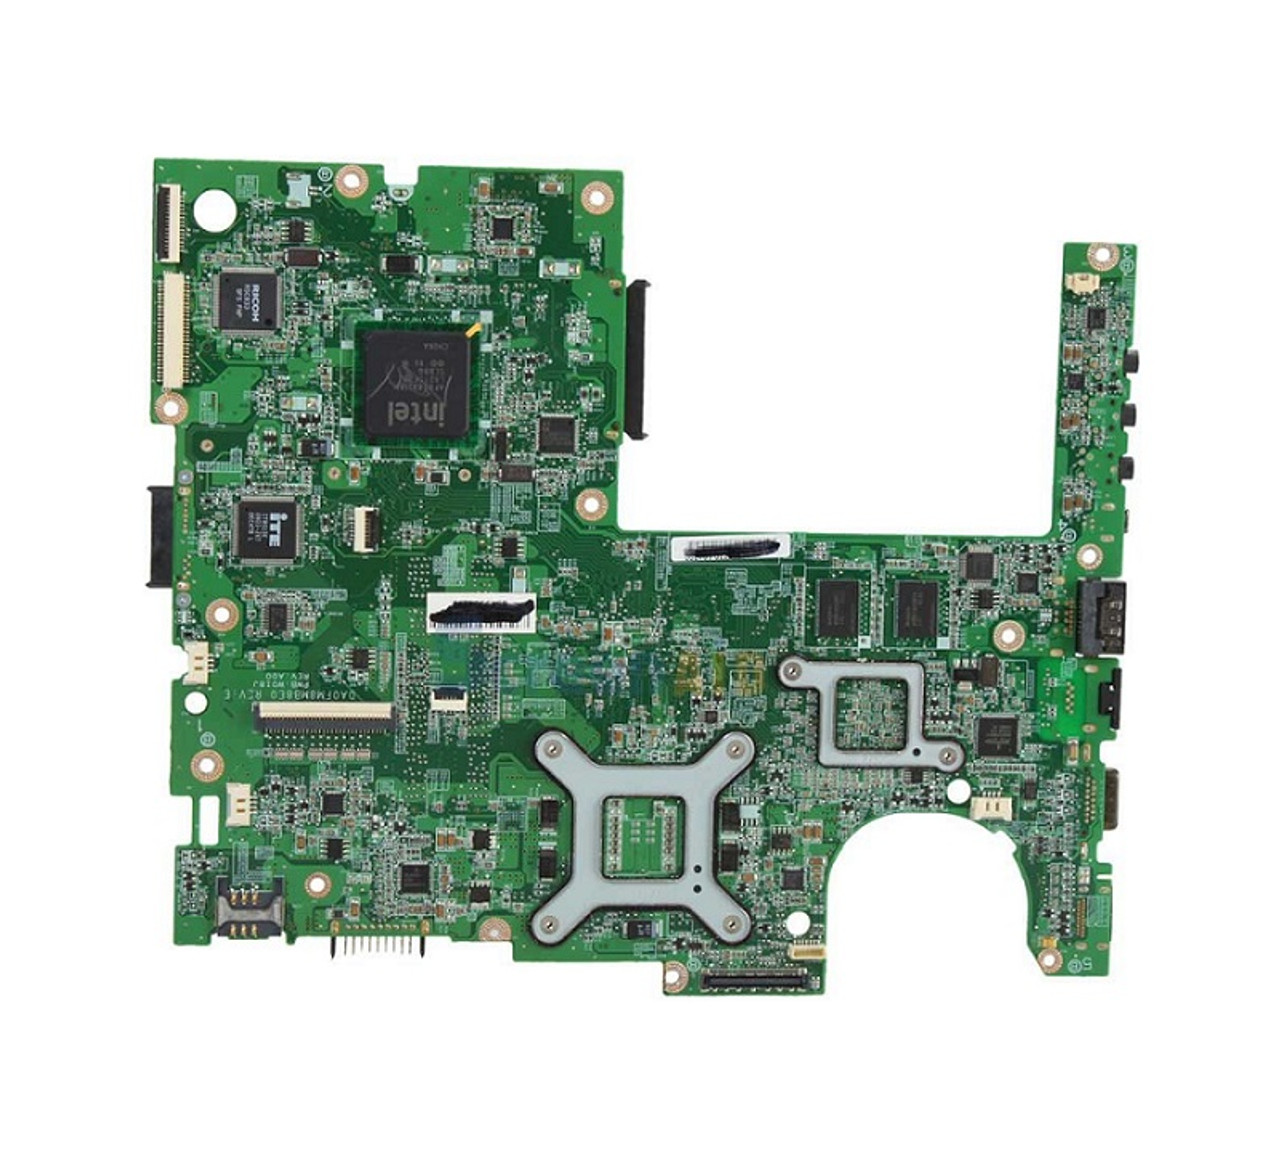 0WP043 - Dell System Board (Motherboard) for Inspiron 1520 Laptop (Refurbished)